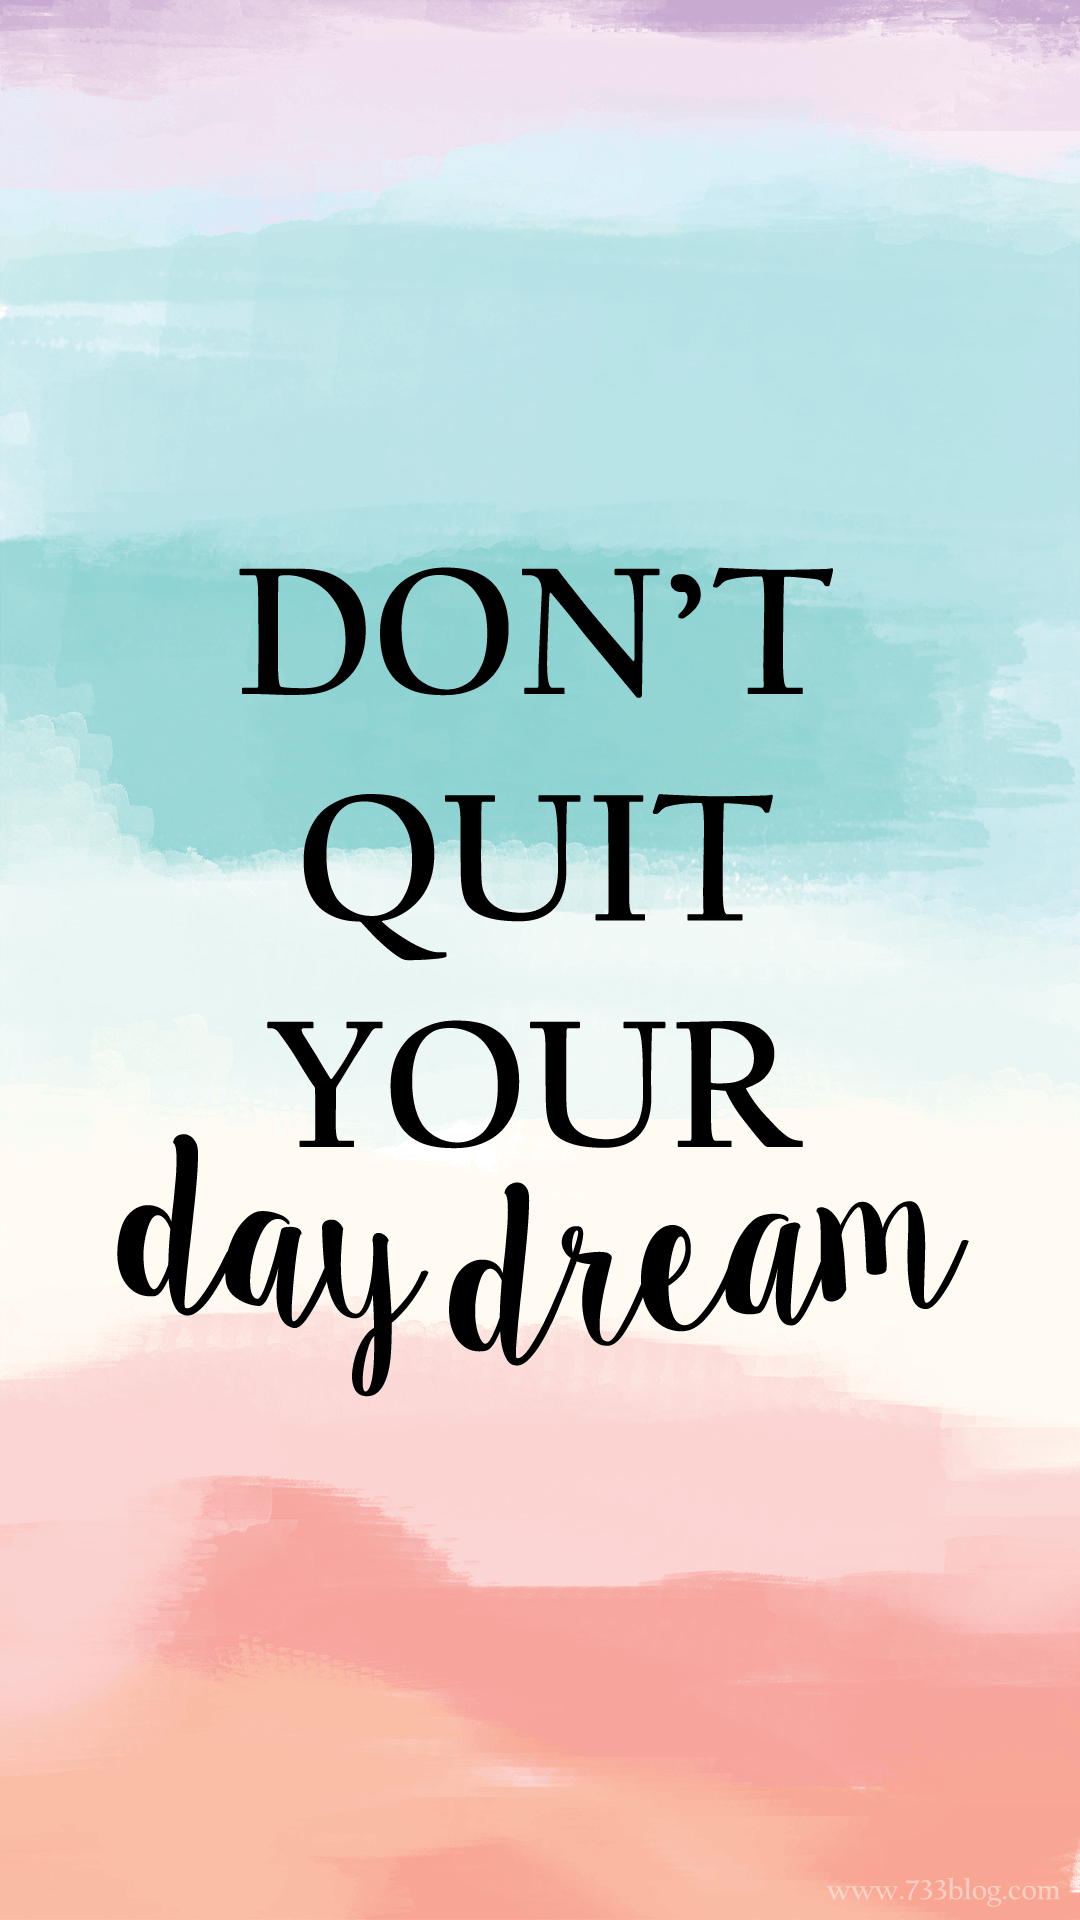 Don't Quit your Daydream Watercolor iPhone Wallpaper. iPhone wallpaper quotes inspirational, Inspirational quotes wallpaper, Desktop wallpaper quotes